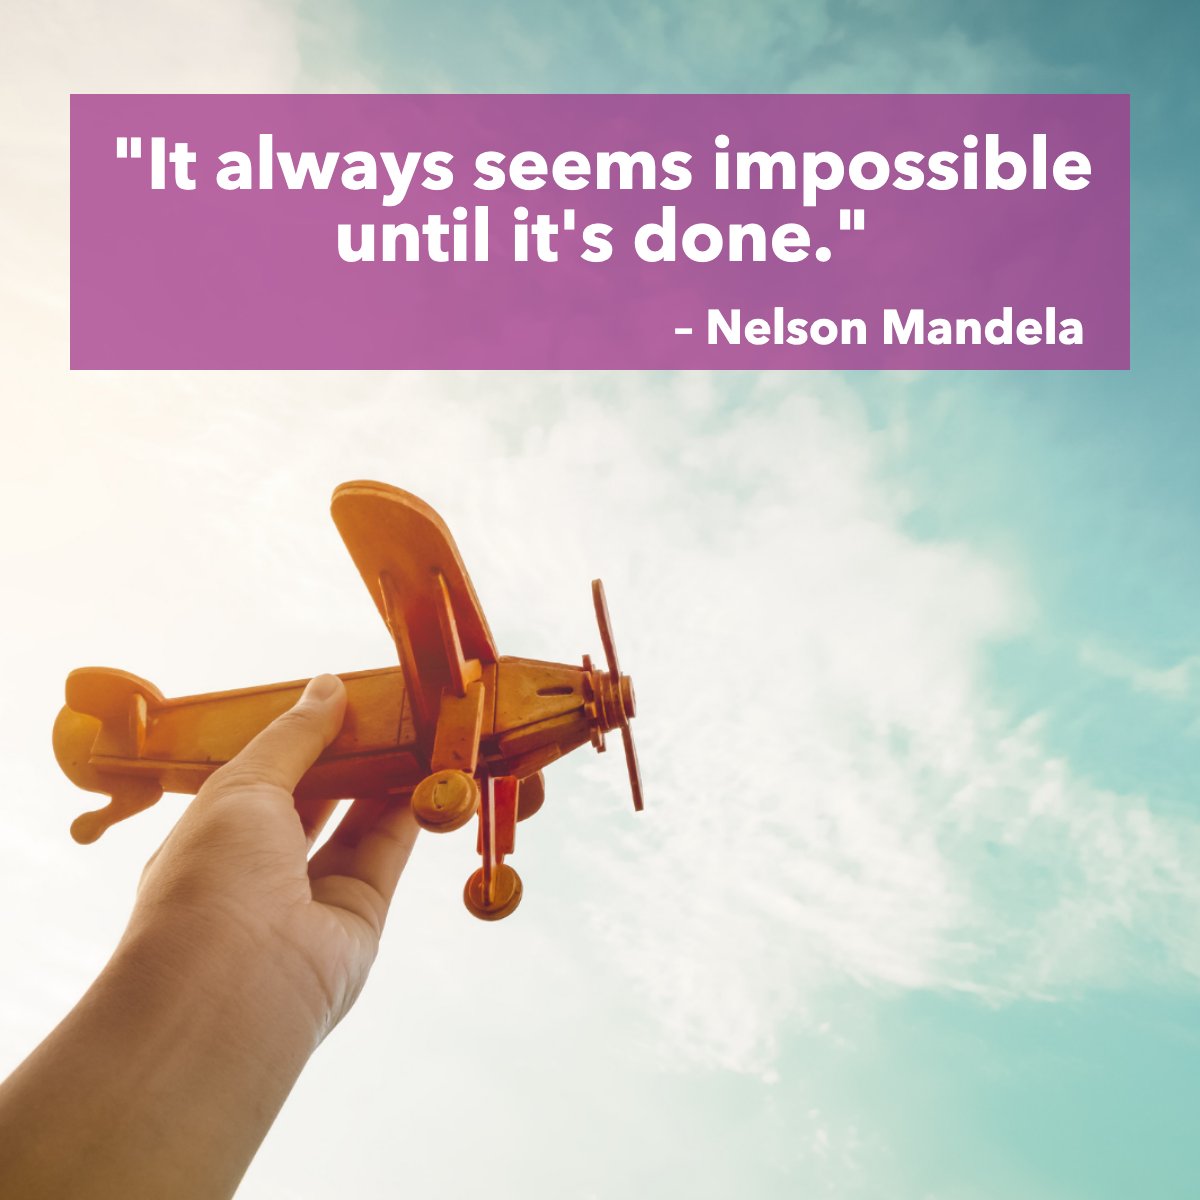 'It always seems impossible until it's done.' – Nelson Mandela What big things are you taking on this week? #airplane #toyairplane #impossible #fly #quote #inspirational #sky #nelsonmandela #RacingRealEstateAgent #BarrettRealEstate #StoneTreeRealEstateTeam